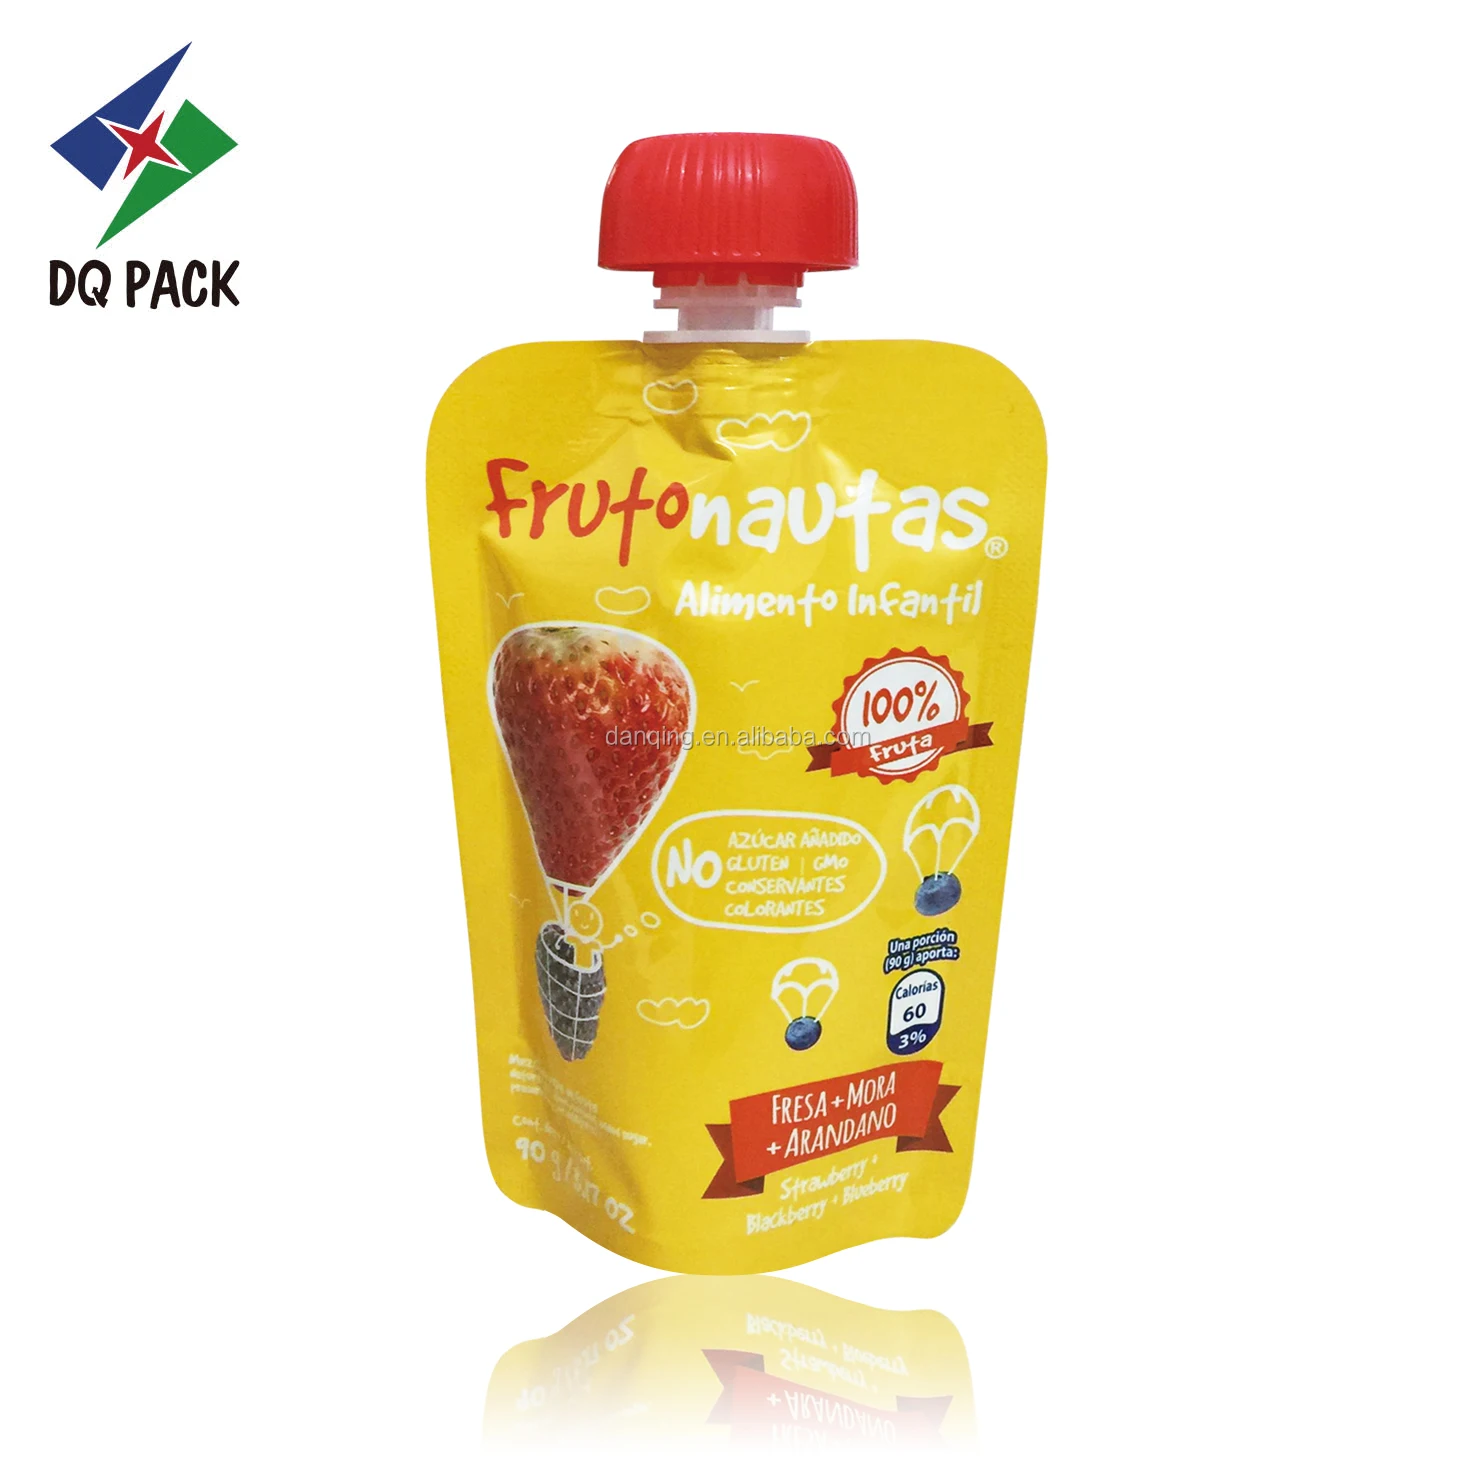 DQ PACK Food Spout shaped Pouch Juice Packaging Drink Packaging